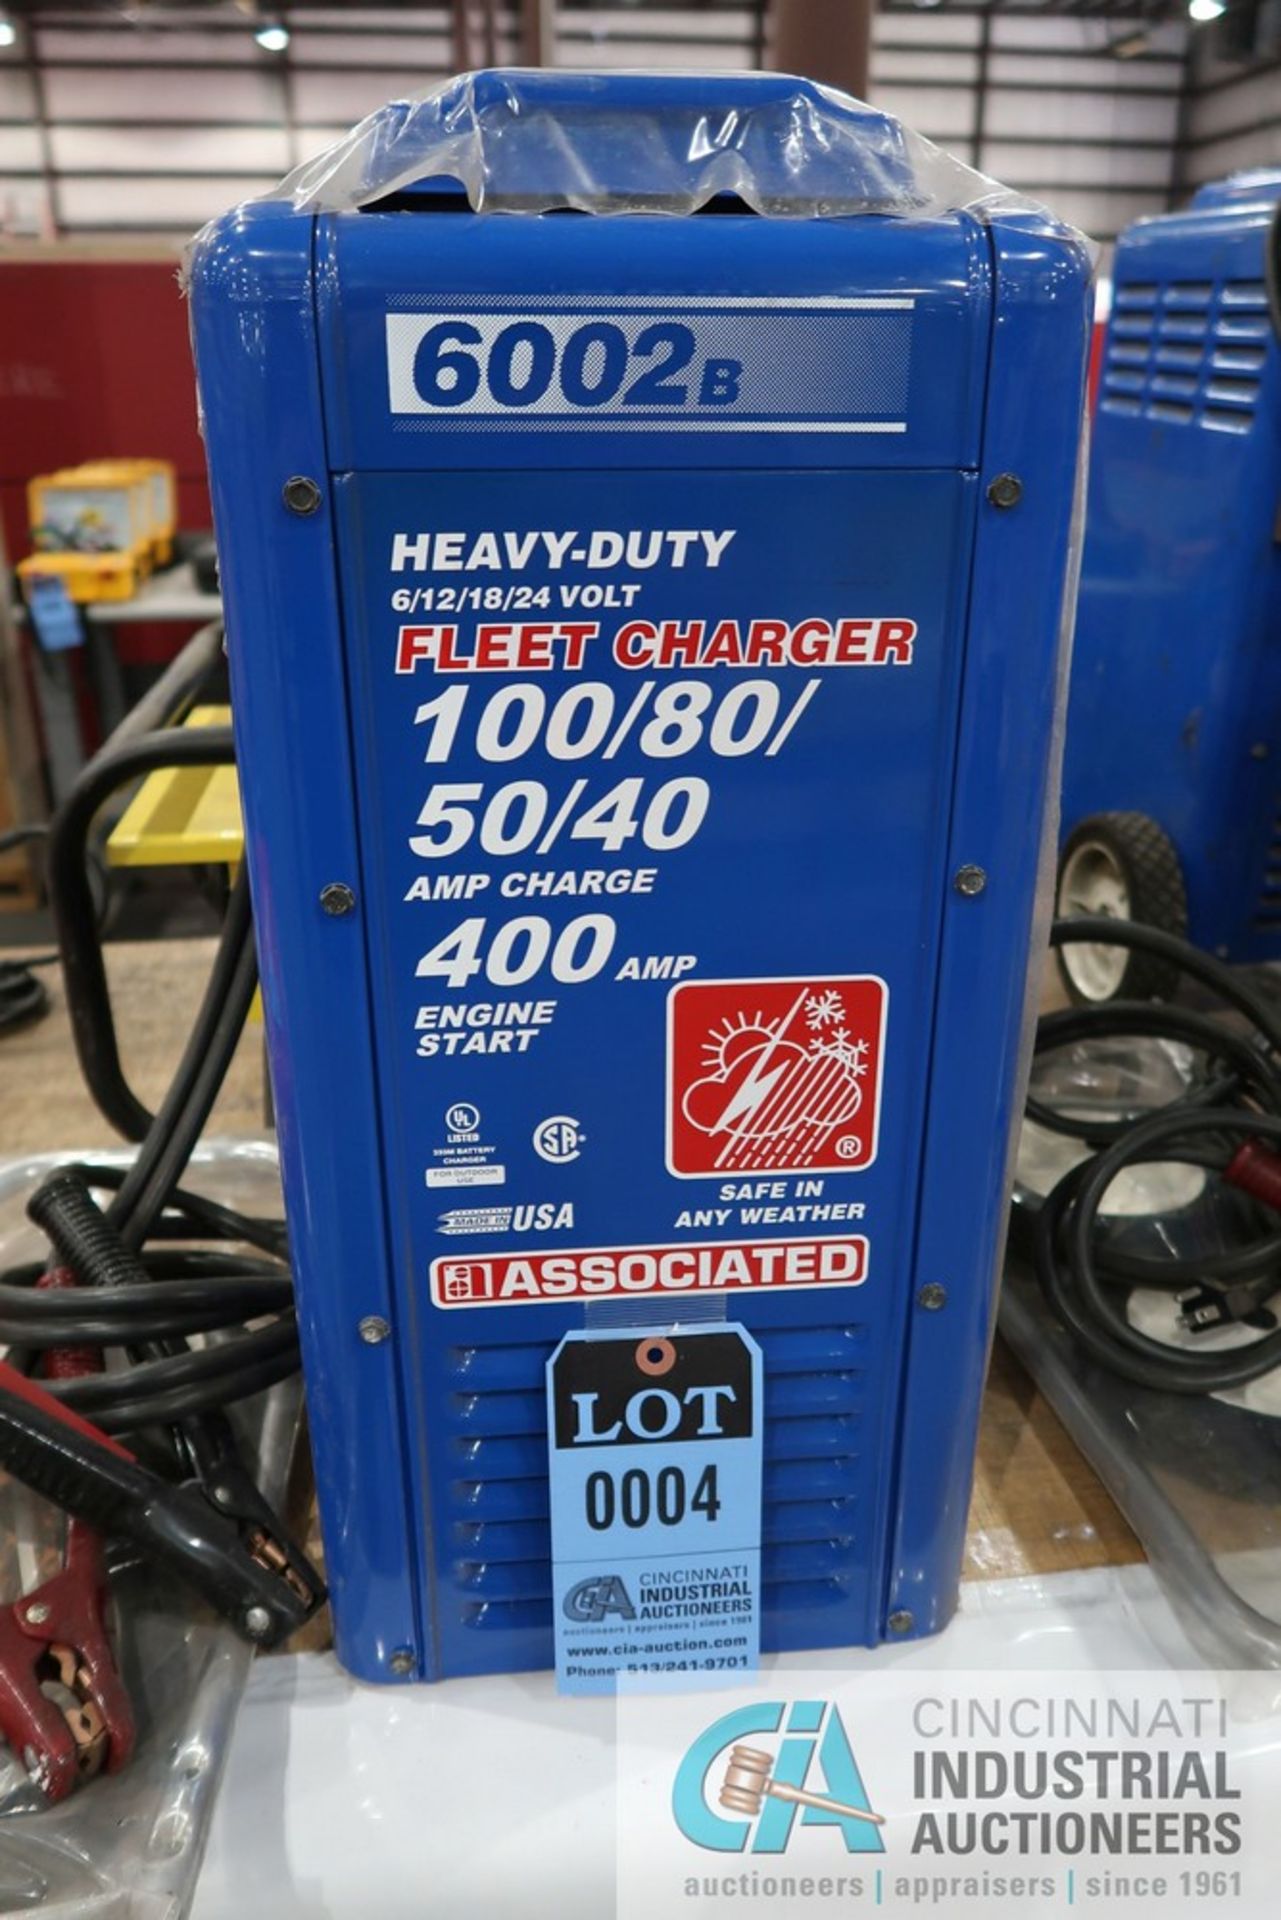 ASSOCIATED MODEL 6002B HEAVY DUTY FLEET CHARGER; 100/80/50/40 AMP CHARGE, 400-AMP ENGINE START * - Image 2 of 3